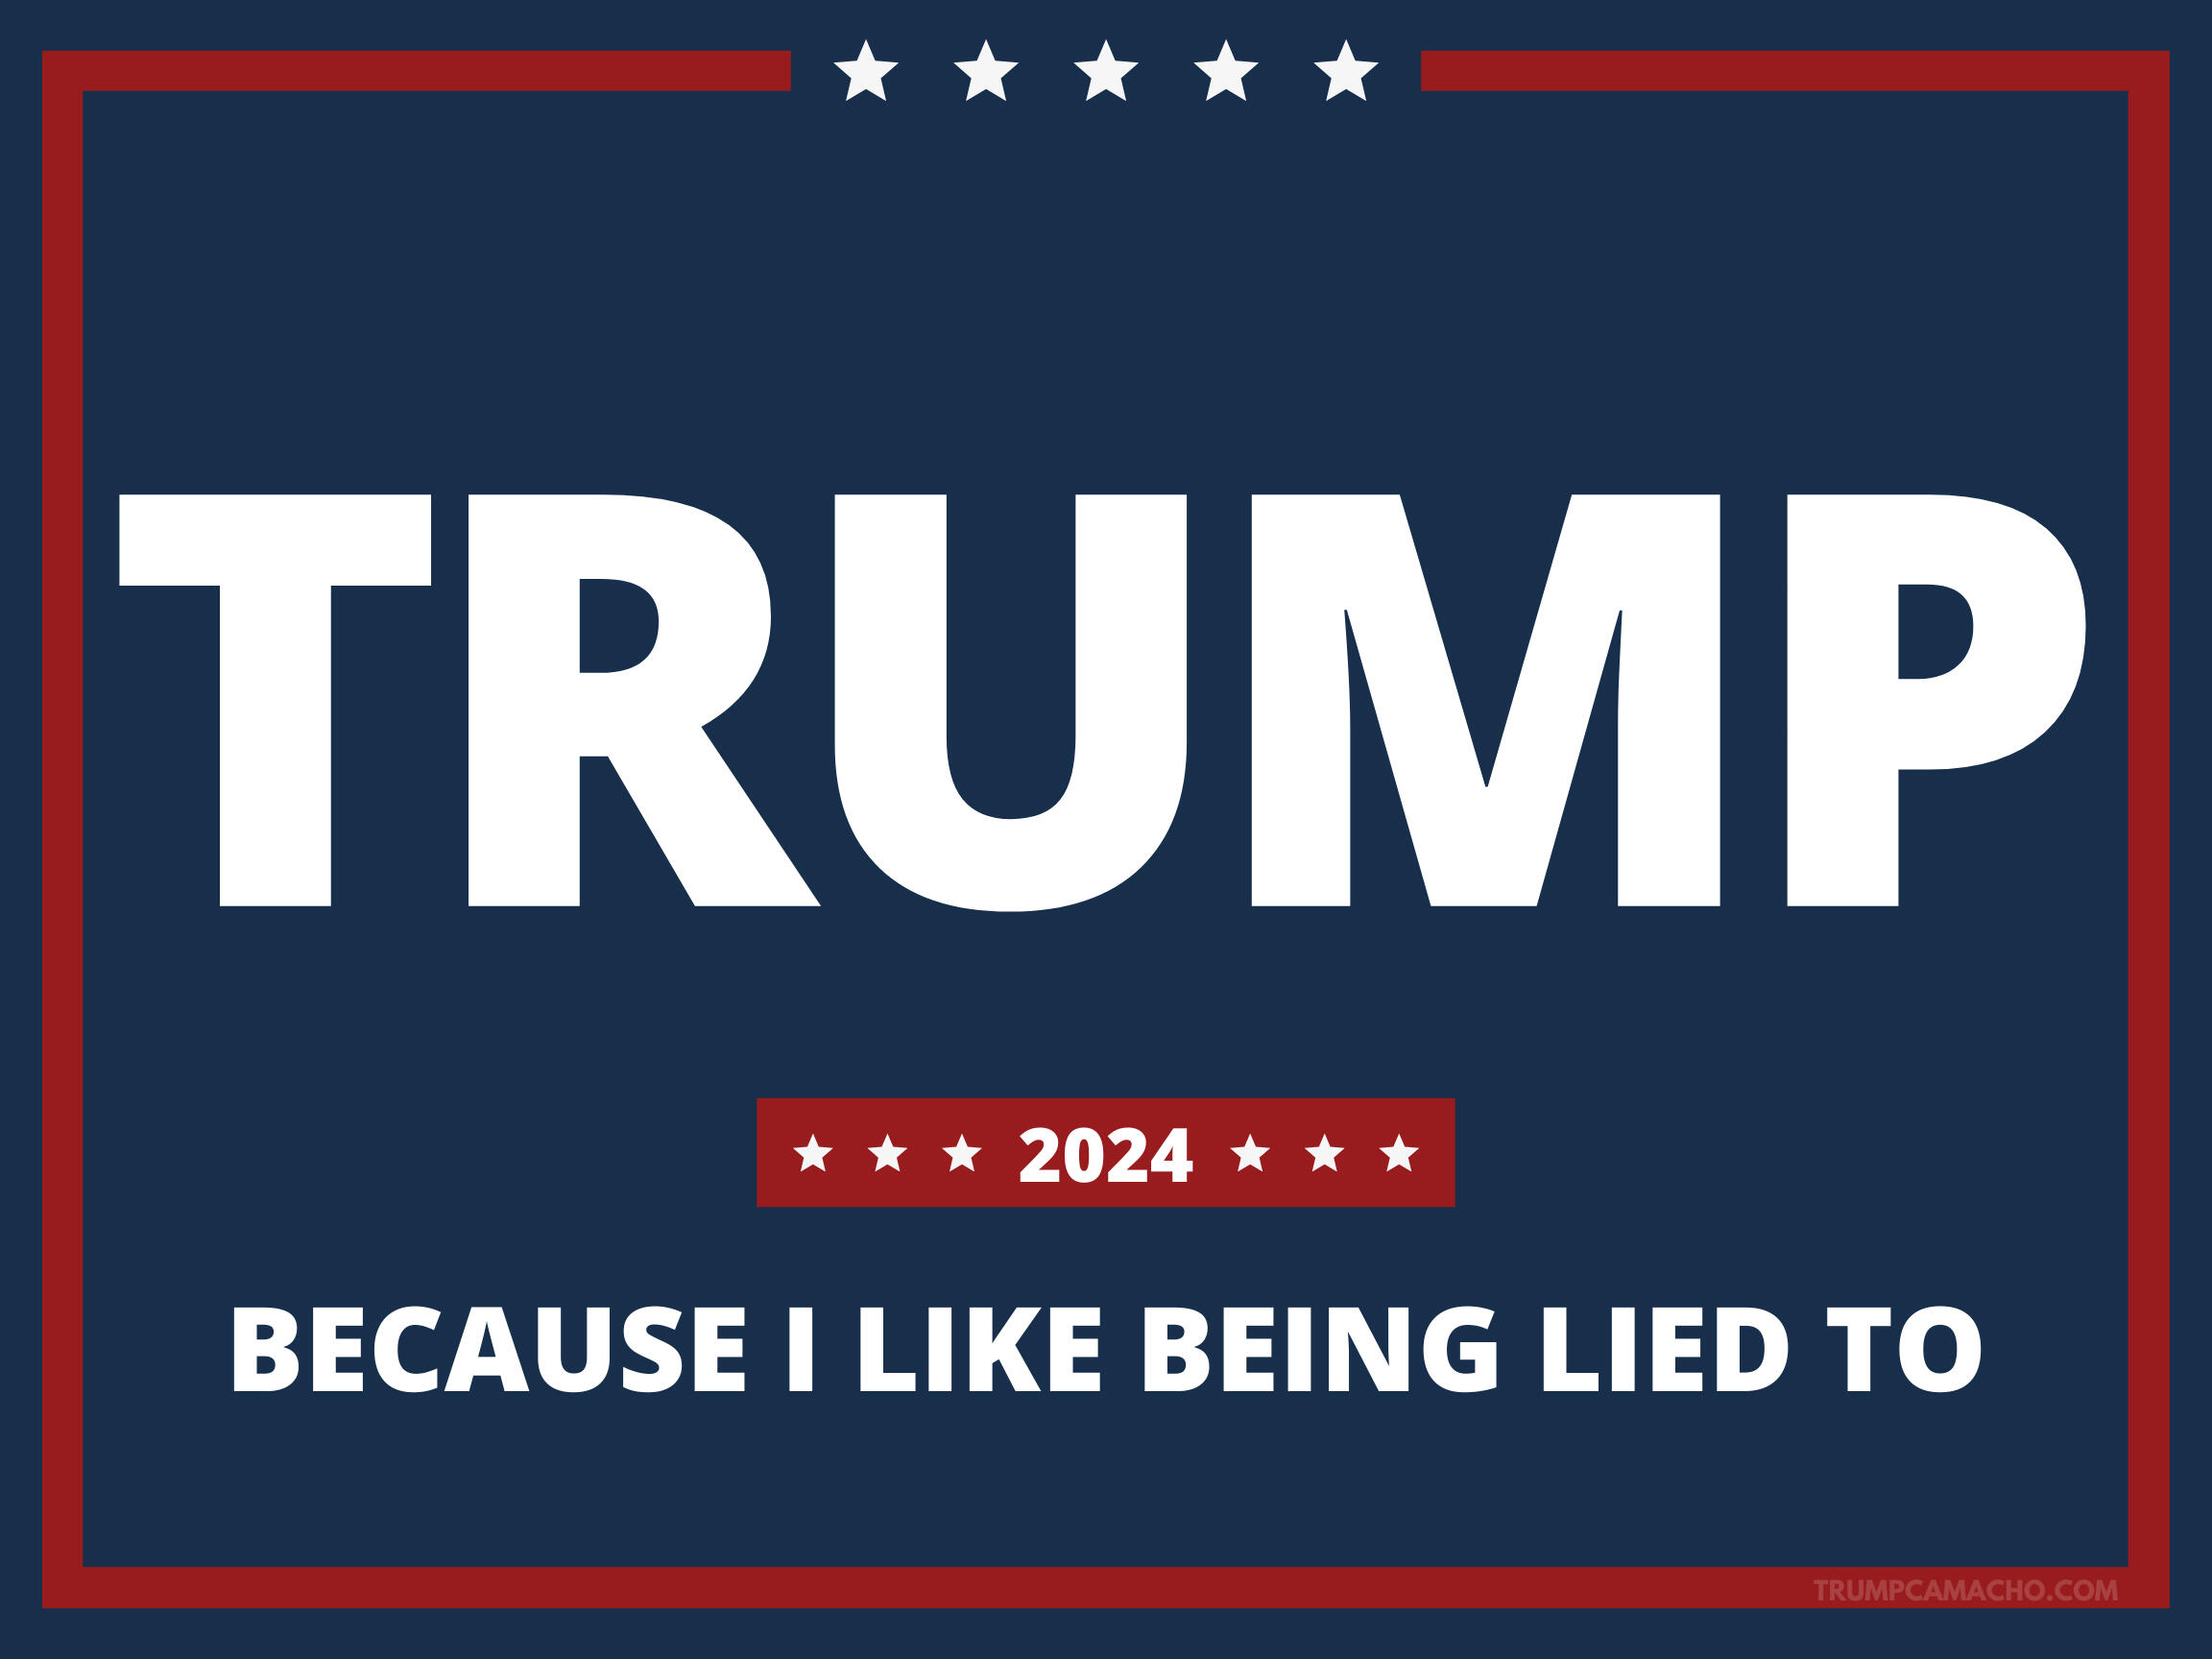 Trump 2024: Because I like being lied to.